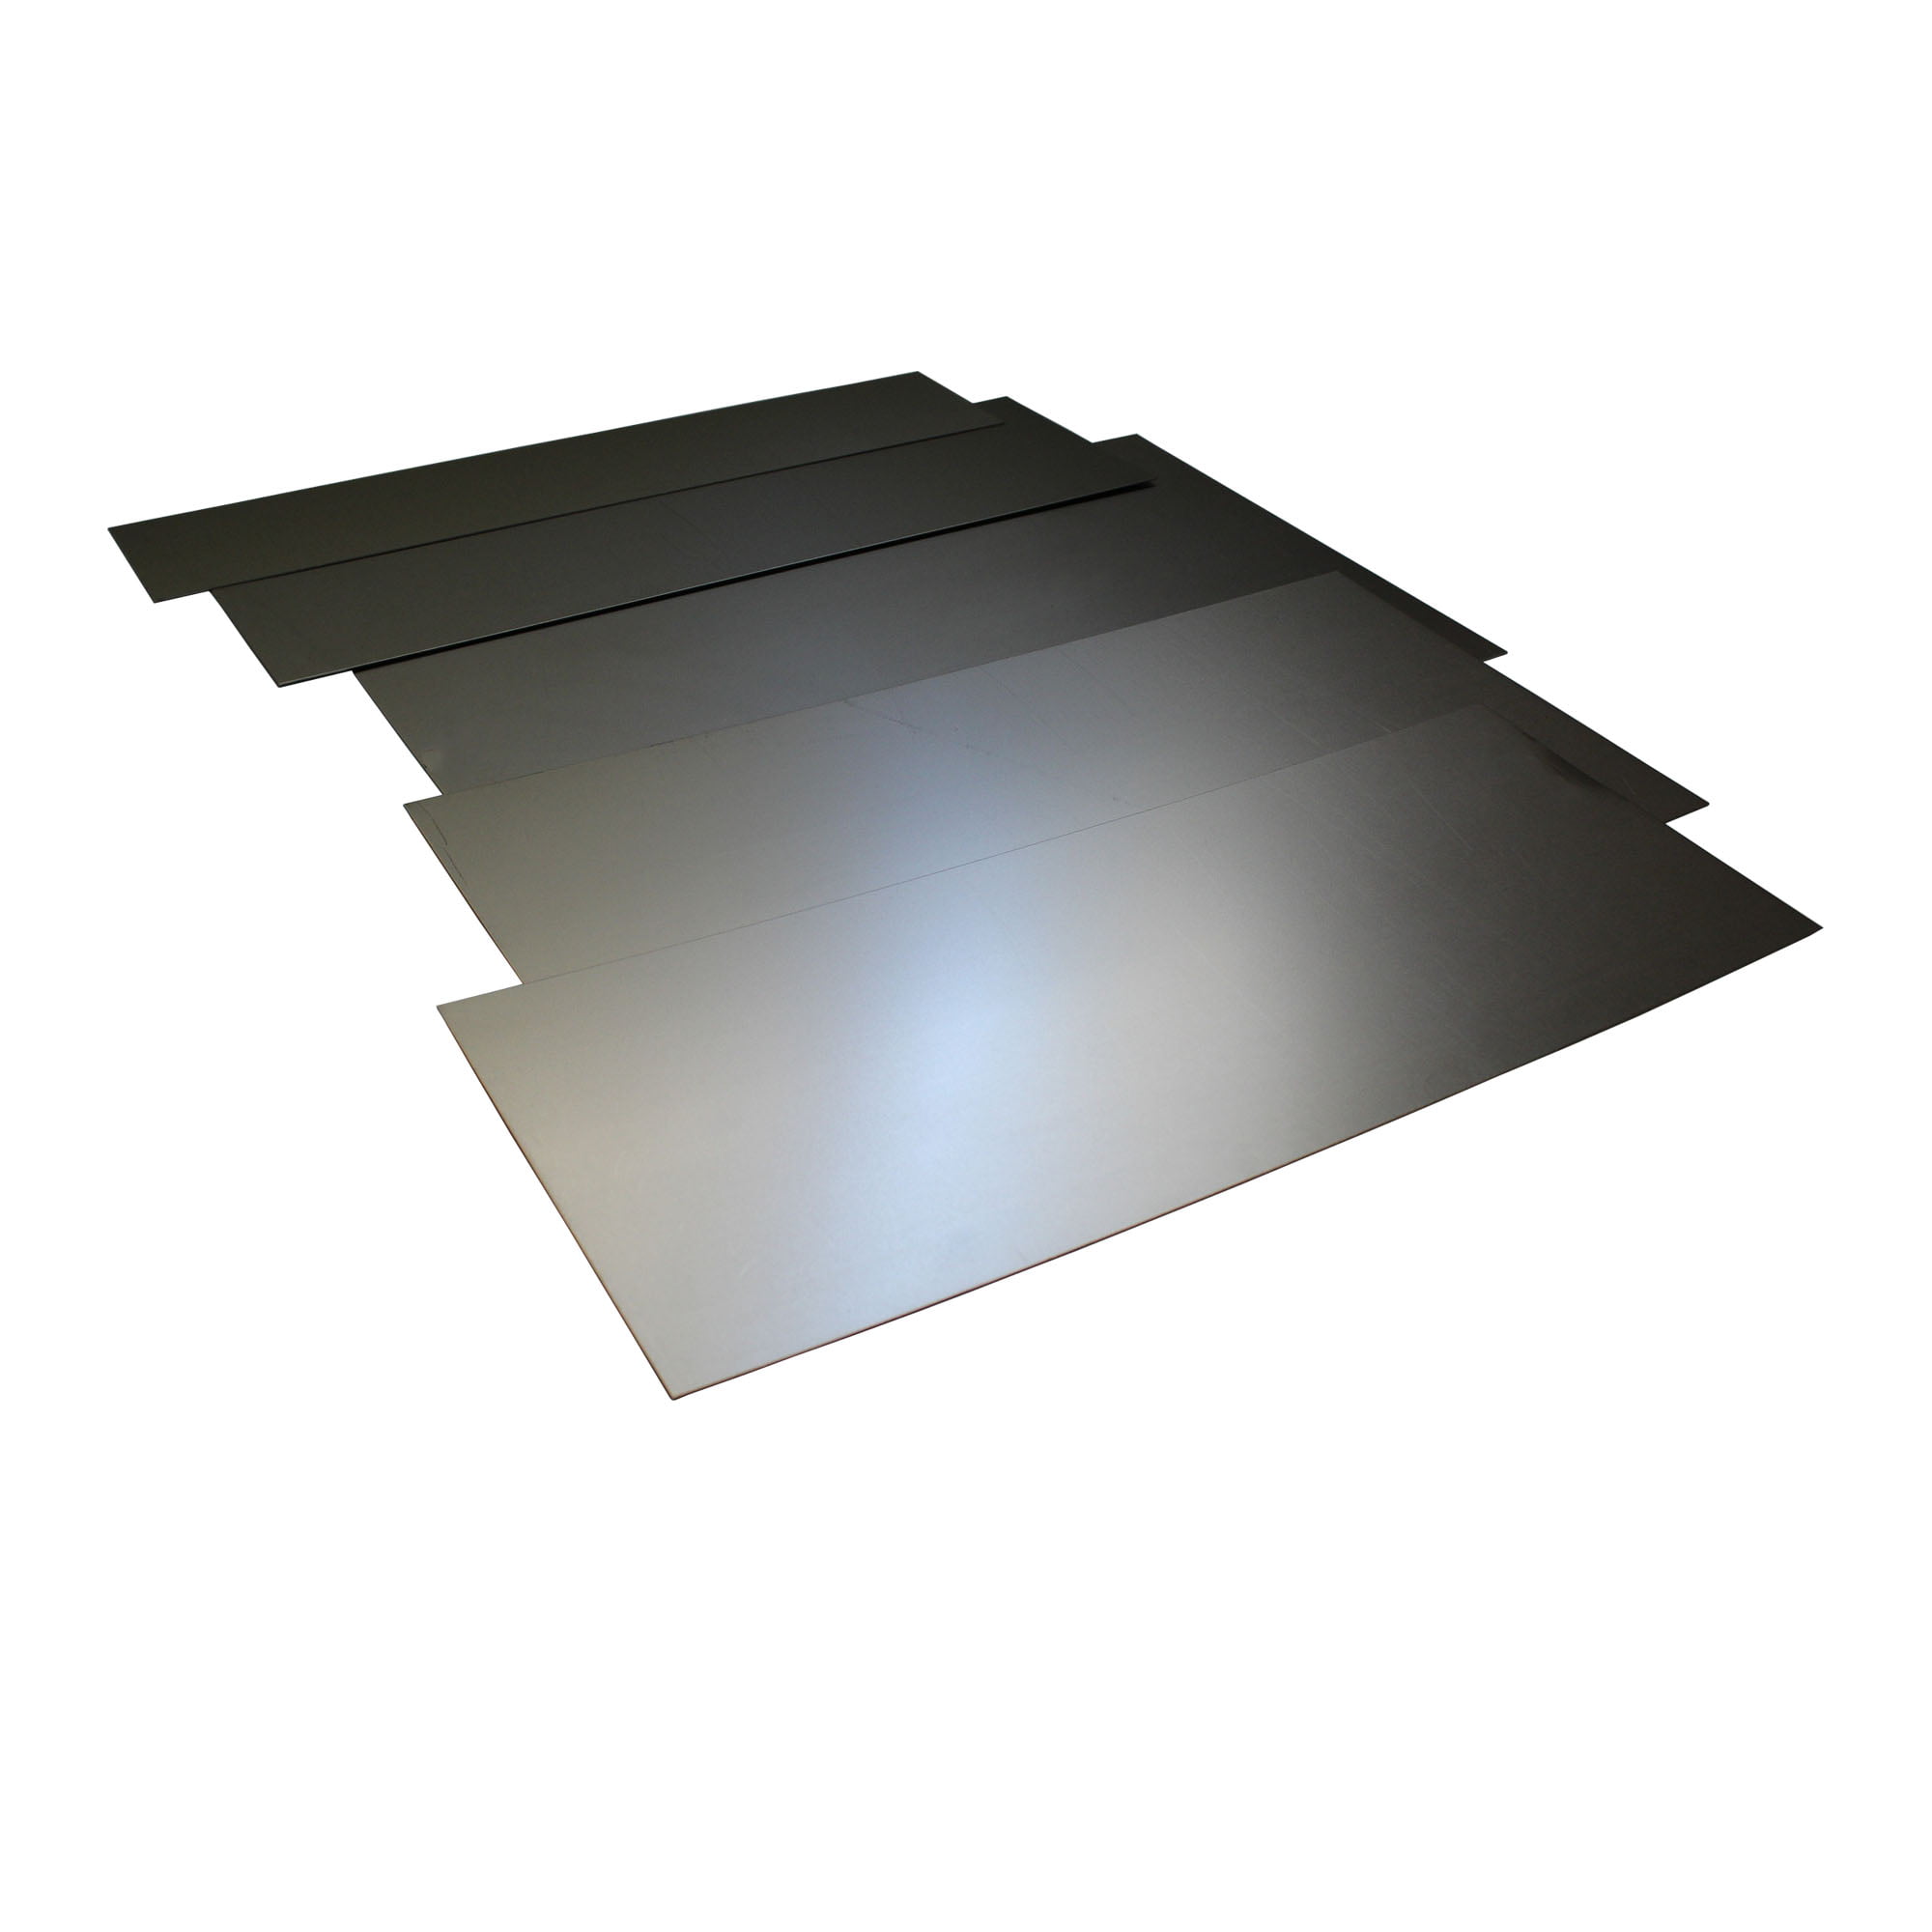 0.9mm Thick Mild Steel Metal Thin Sheet Plate - Speciality Metals